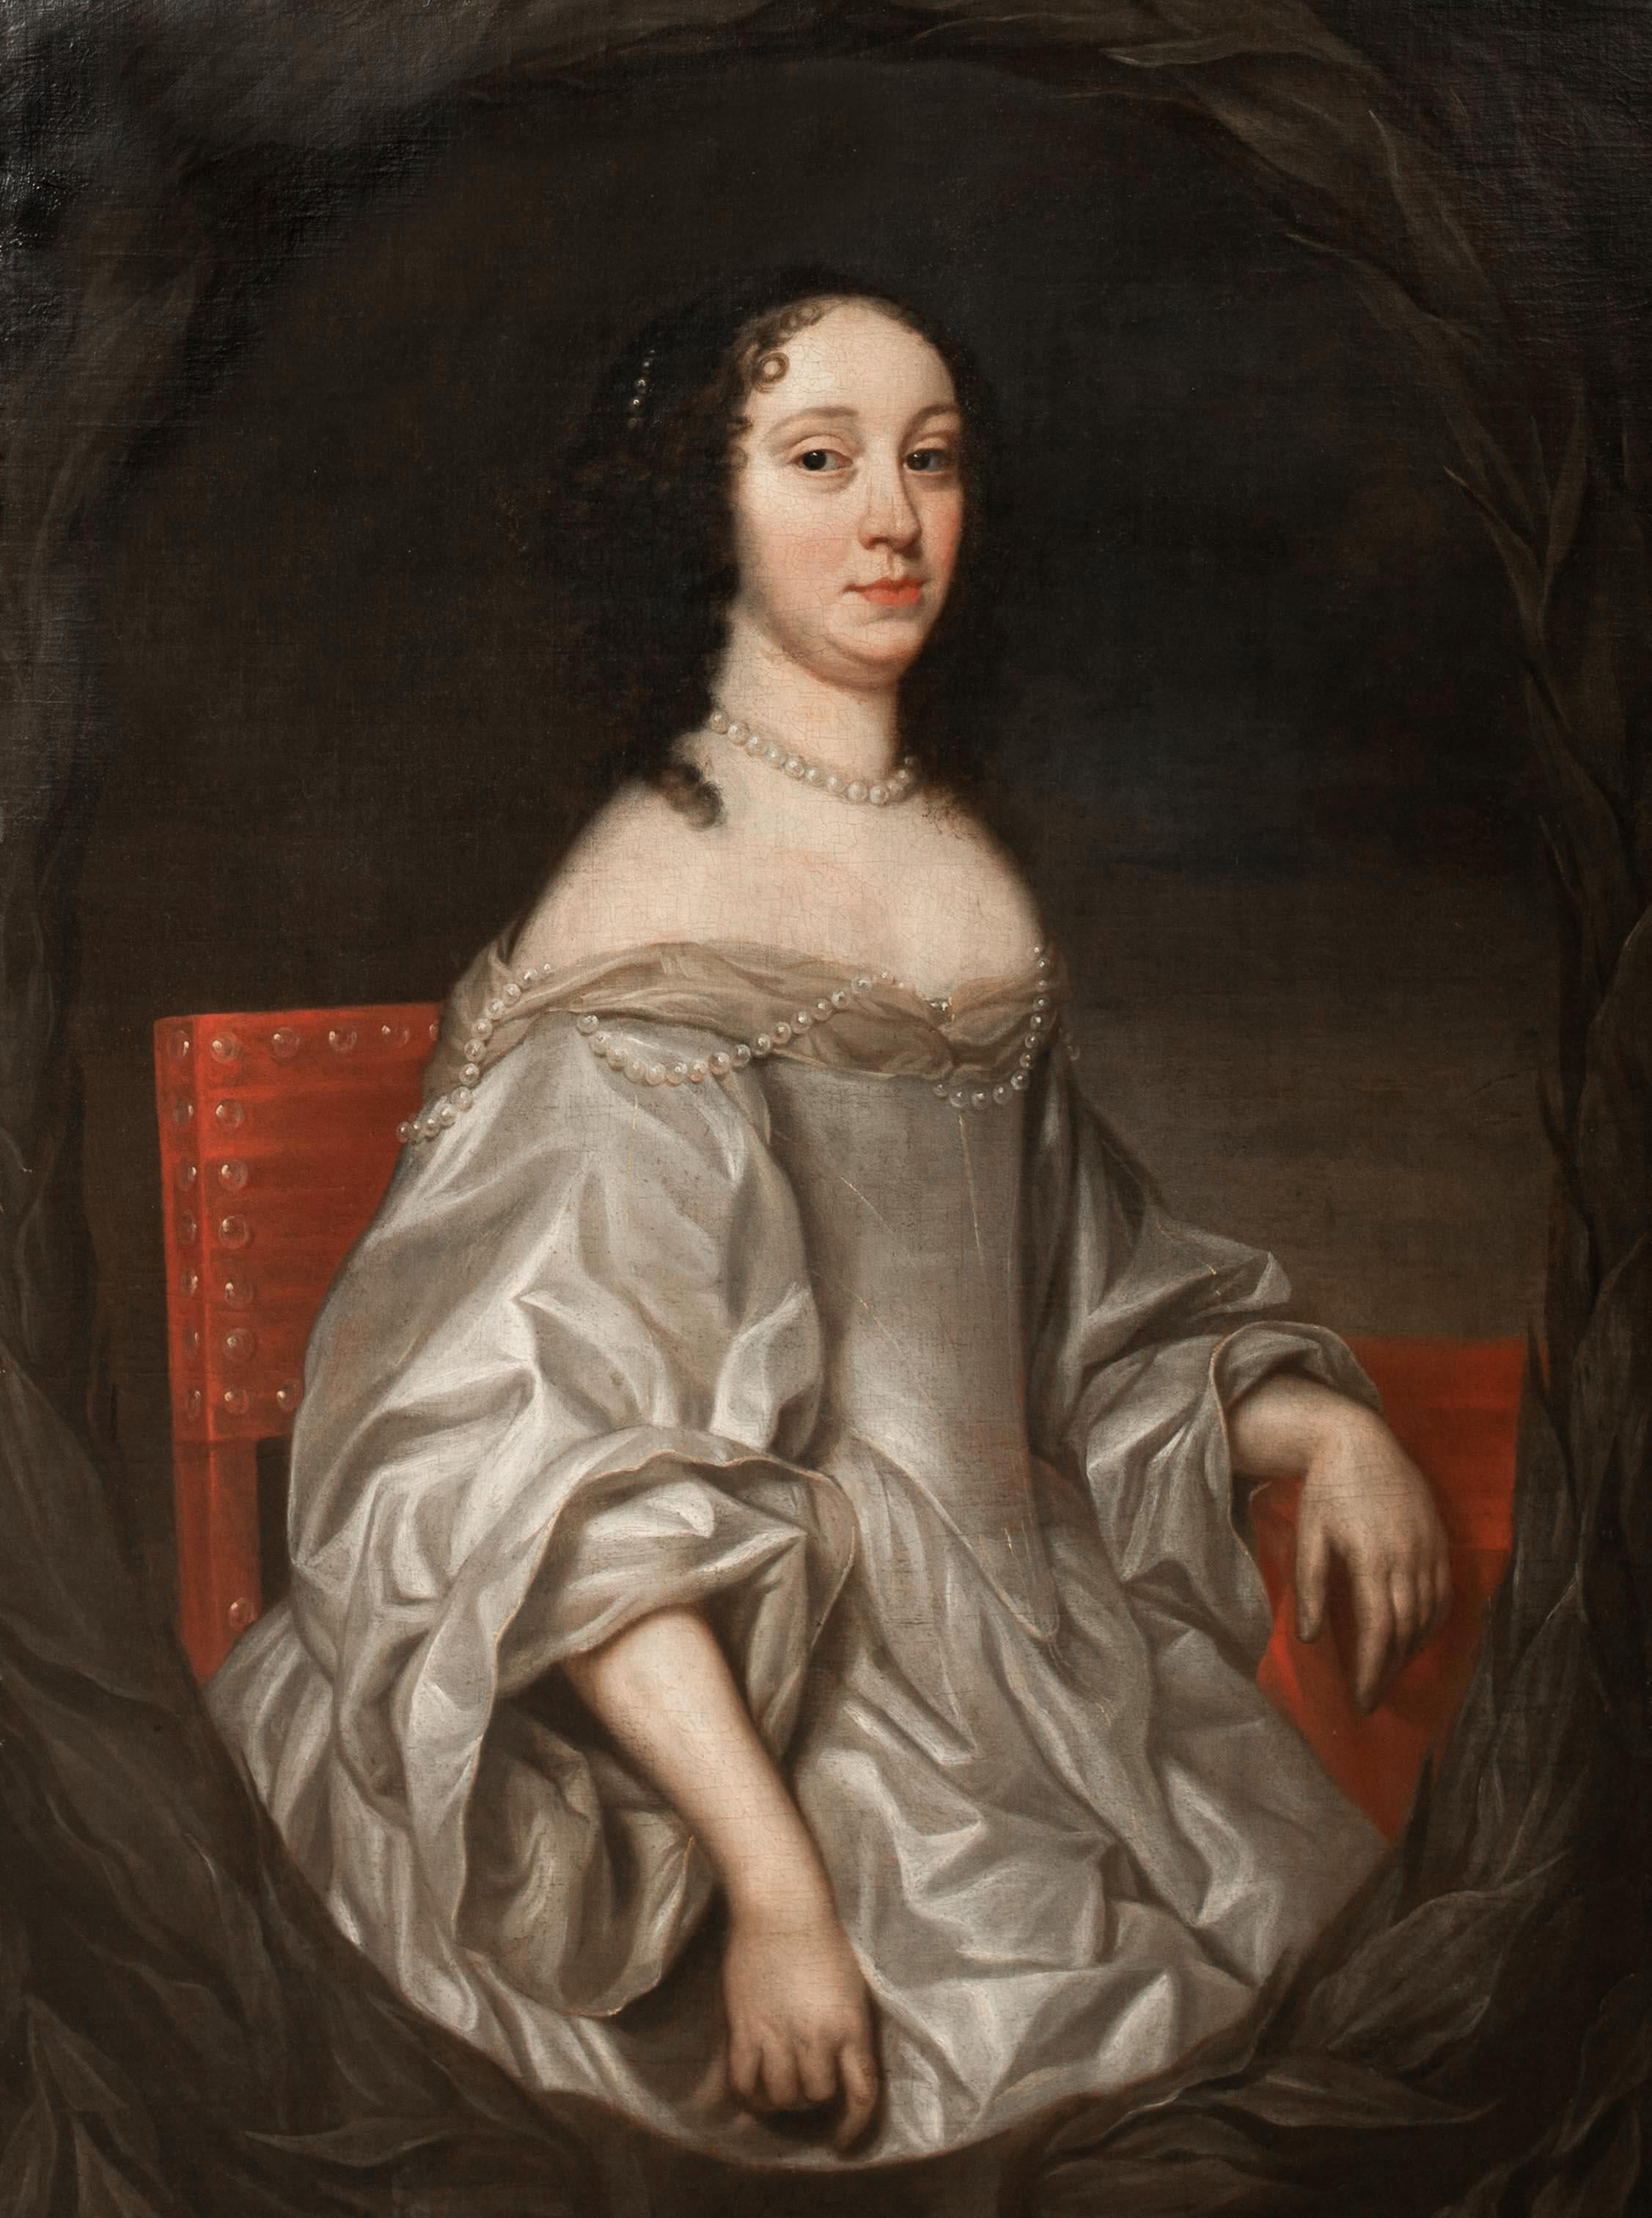 Portrait Of Marie Louise Gonzaga Queen Of Poland, Grand Duchess of Lithuania (1611-1667), 17th Century

circle of Sir Peter Lely (1618-1680)

Large 17th century portrait of Marie Louise Gonzaga, Queen of Poland, Grand Duchess of Lithuania, oil on